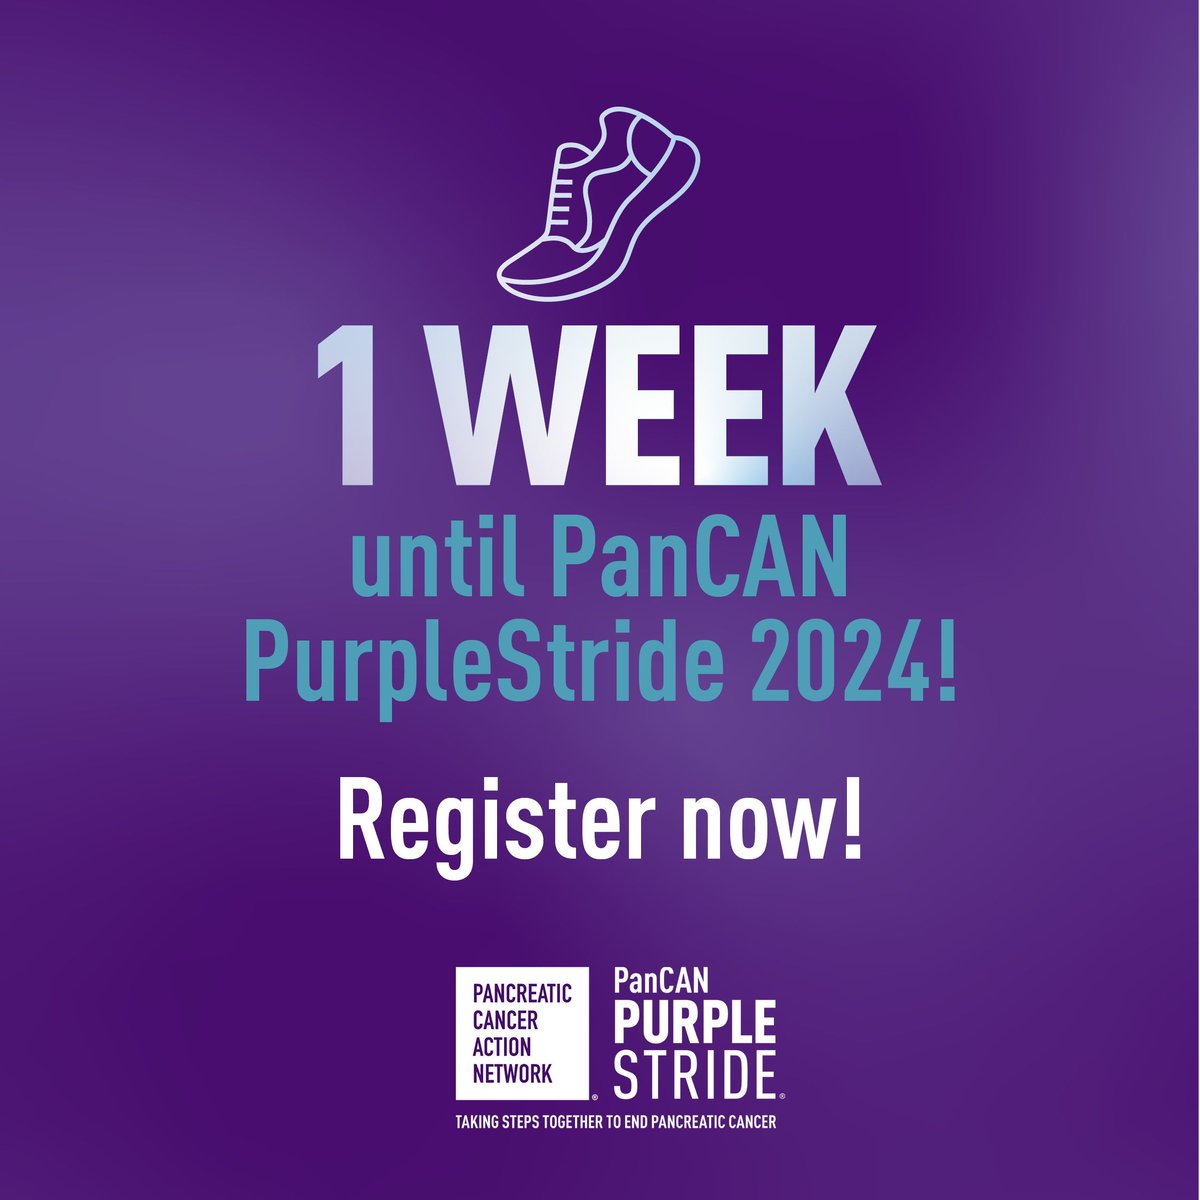 We are so proud to have 3 teams of Immuneers representing our NY, Boston & San Diego locations, participating in the #PanCANPurpleStride walk to support pancreatic cancer research on Sat 4/27 buff.ly/3UfuNLx  
@PanCan 
#PancreaticCancer #DrugDiscovery  #CancerResearch